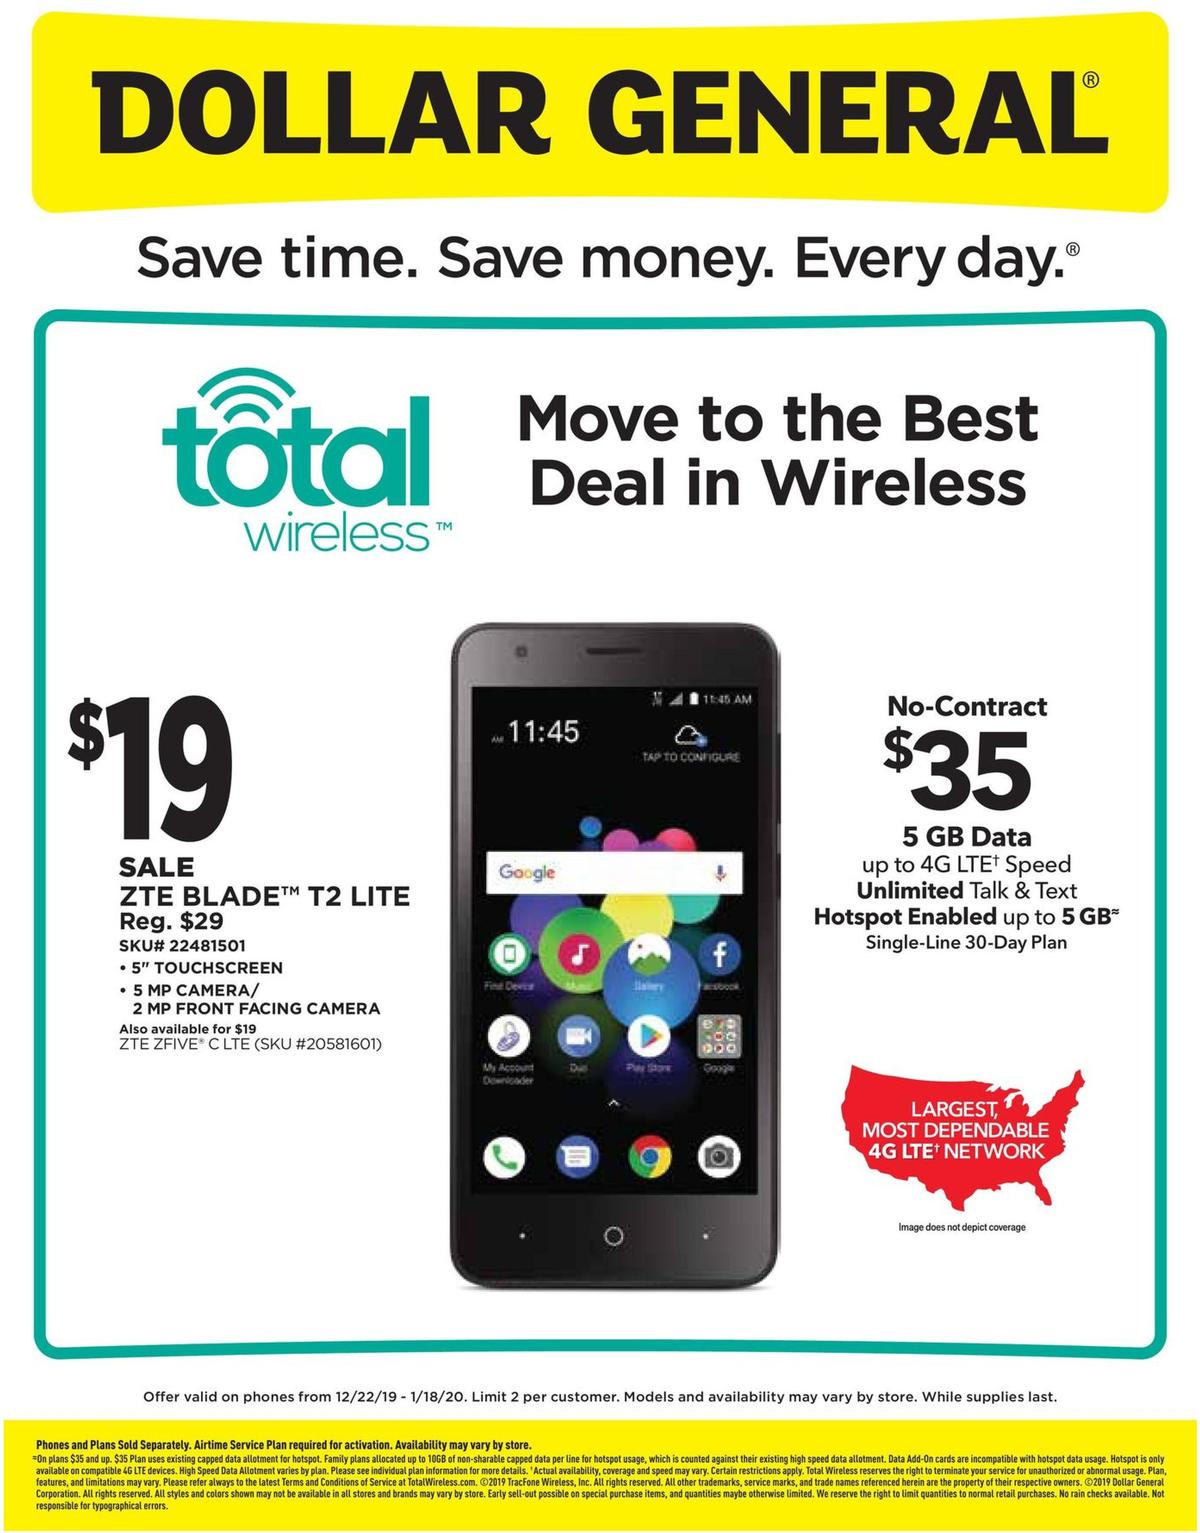 Dollar General Weekly Wireless Specials Weekly Ad from December 22